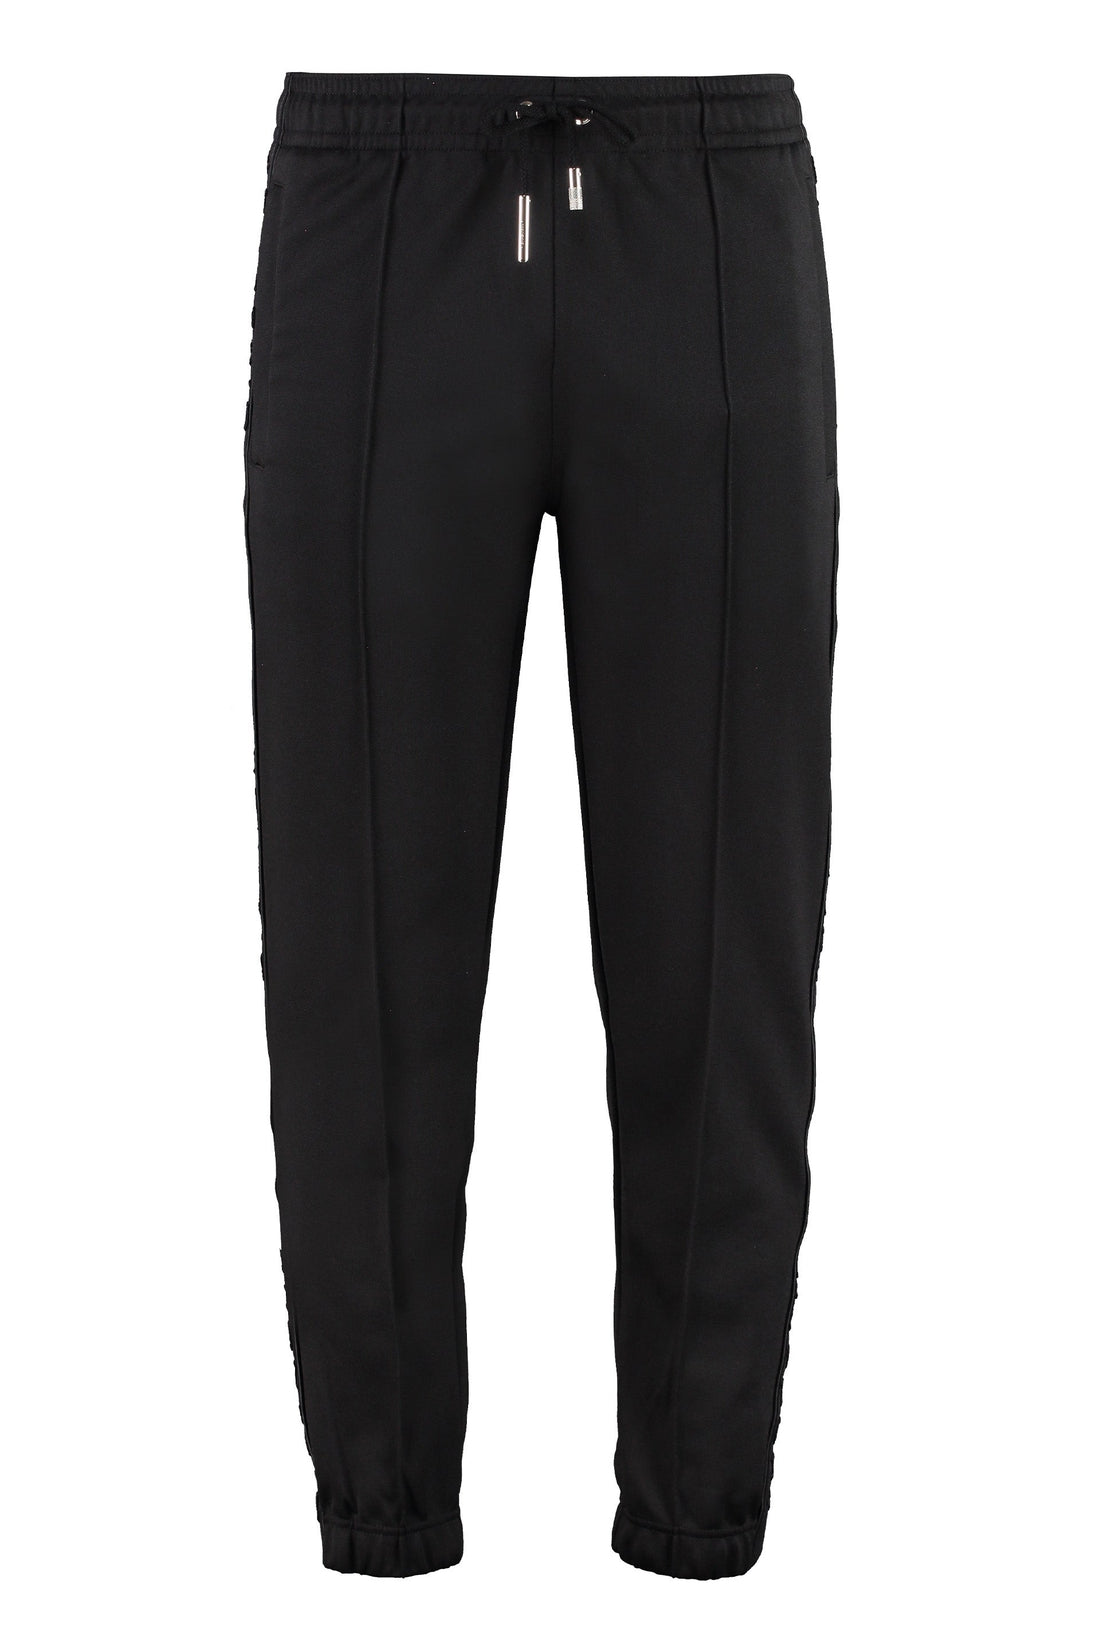 Givenchy-OUTLET-SALE-Track-pants with side logo stripes-ARCHIVIST